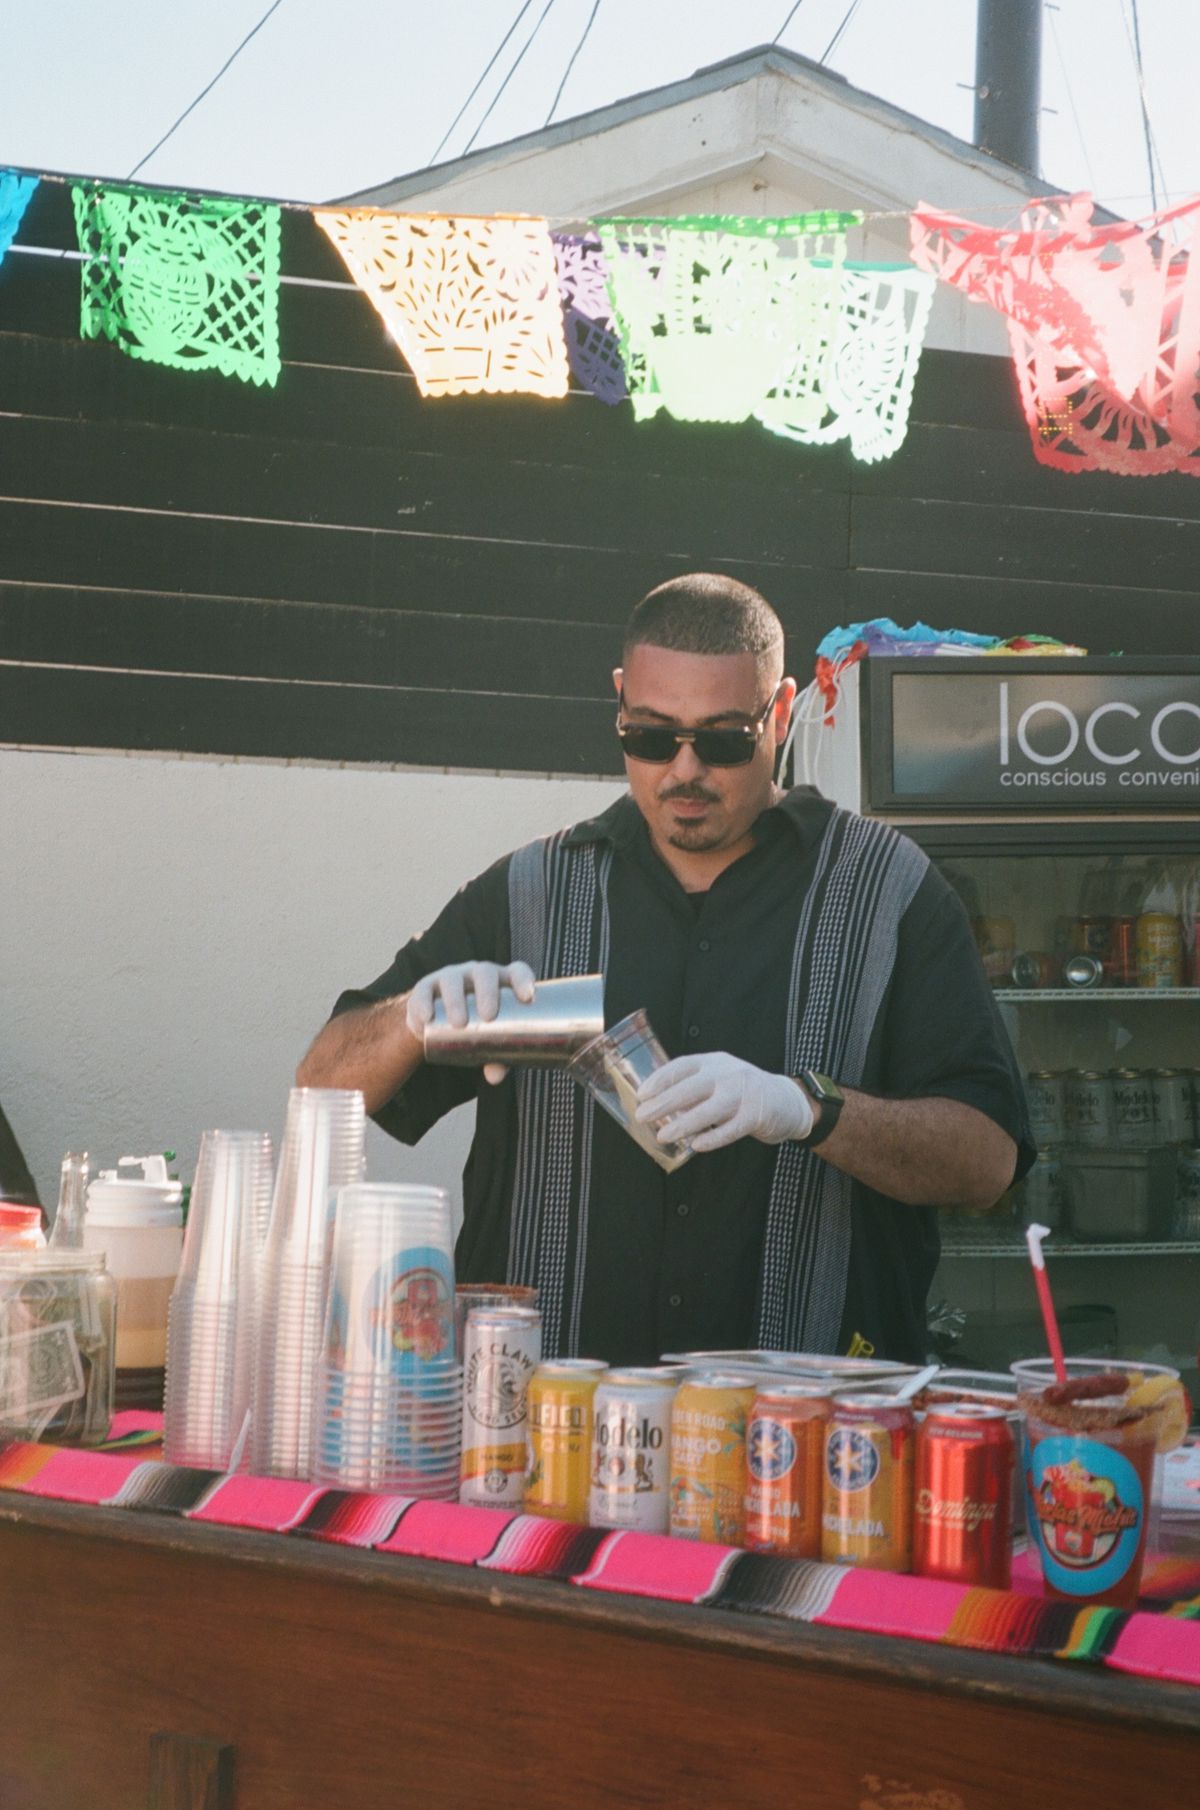 A bartender mixes drinks at a bar filled with cans and cups.